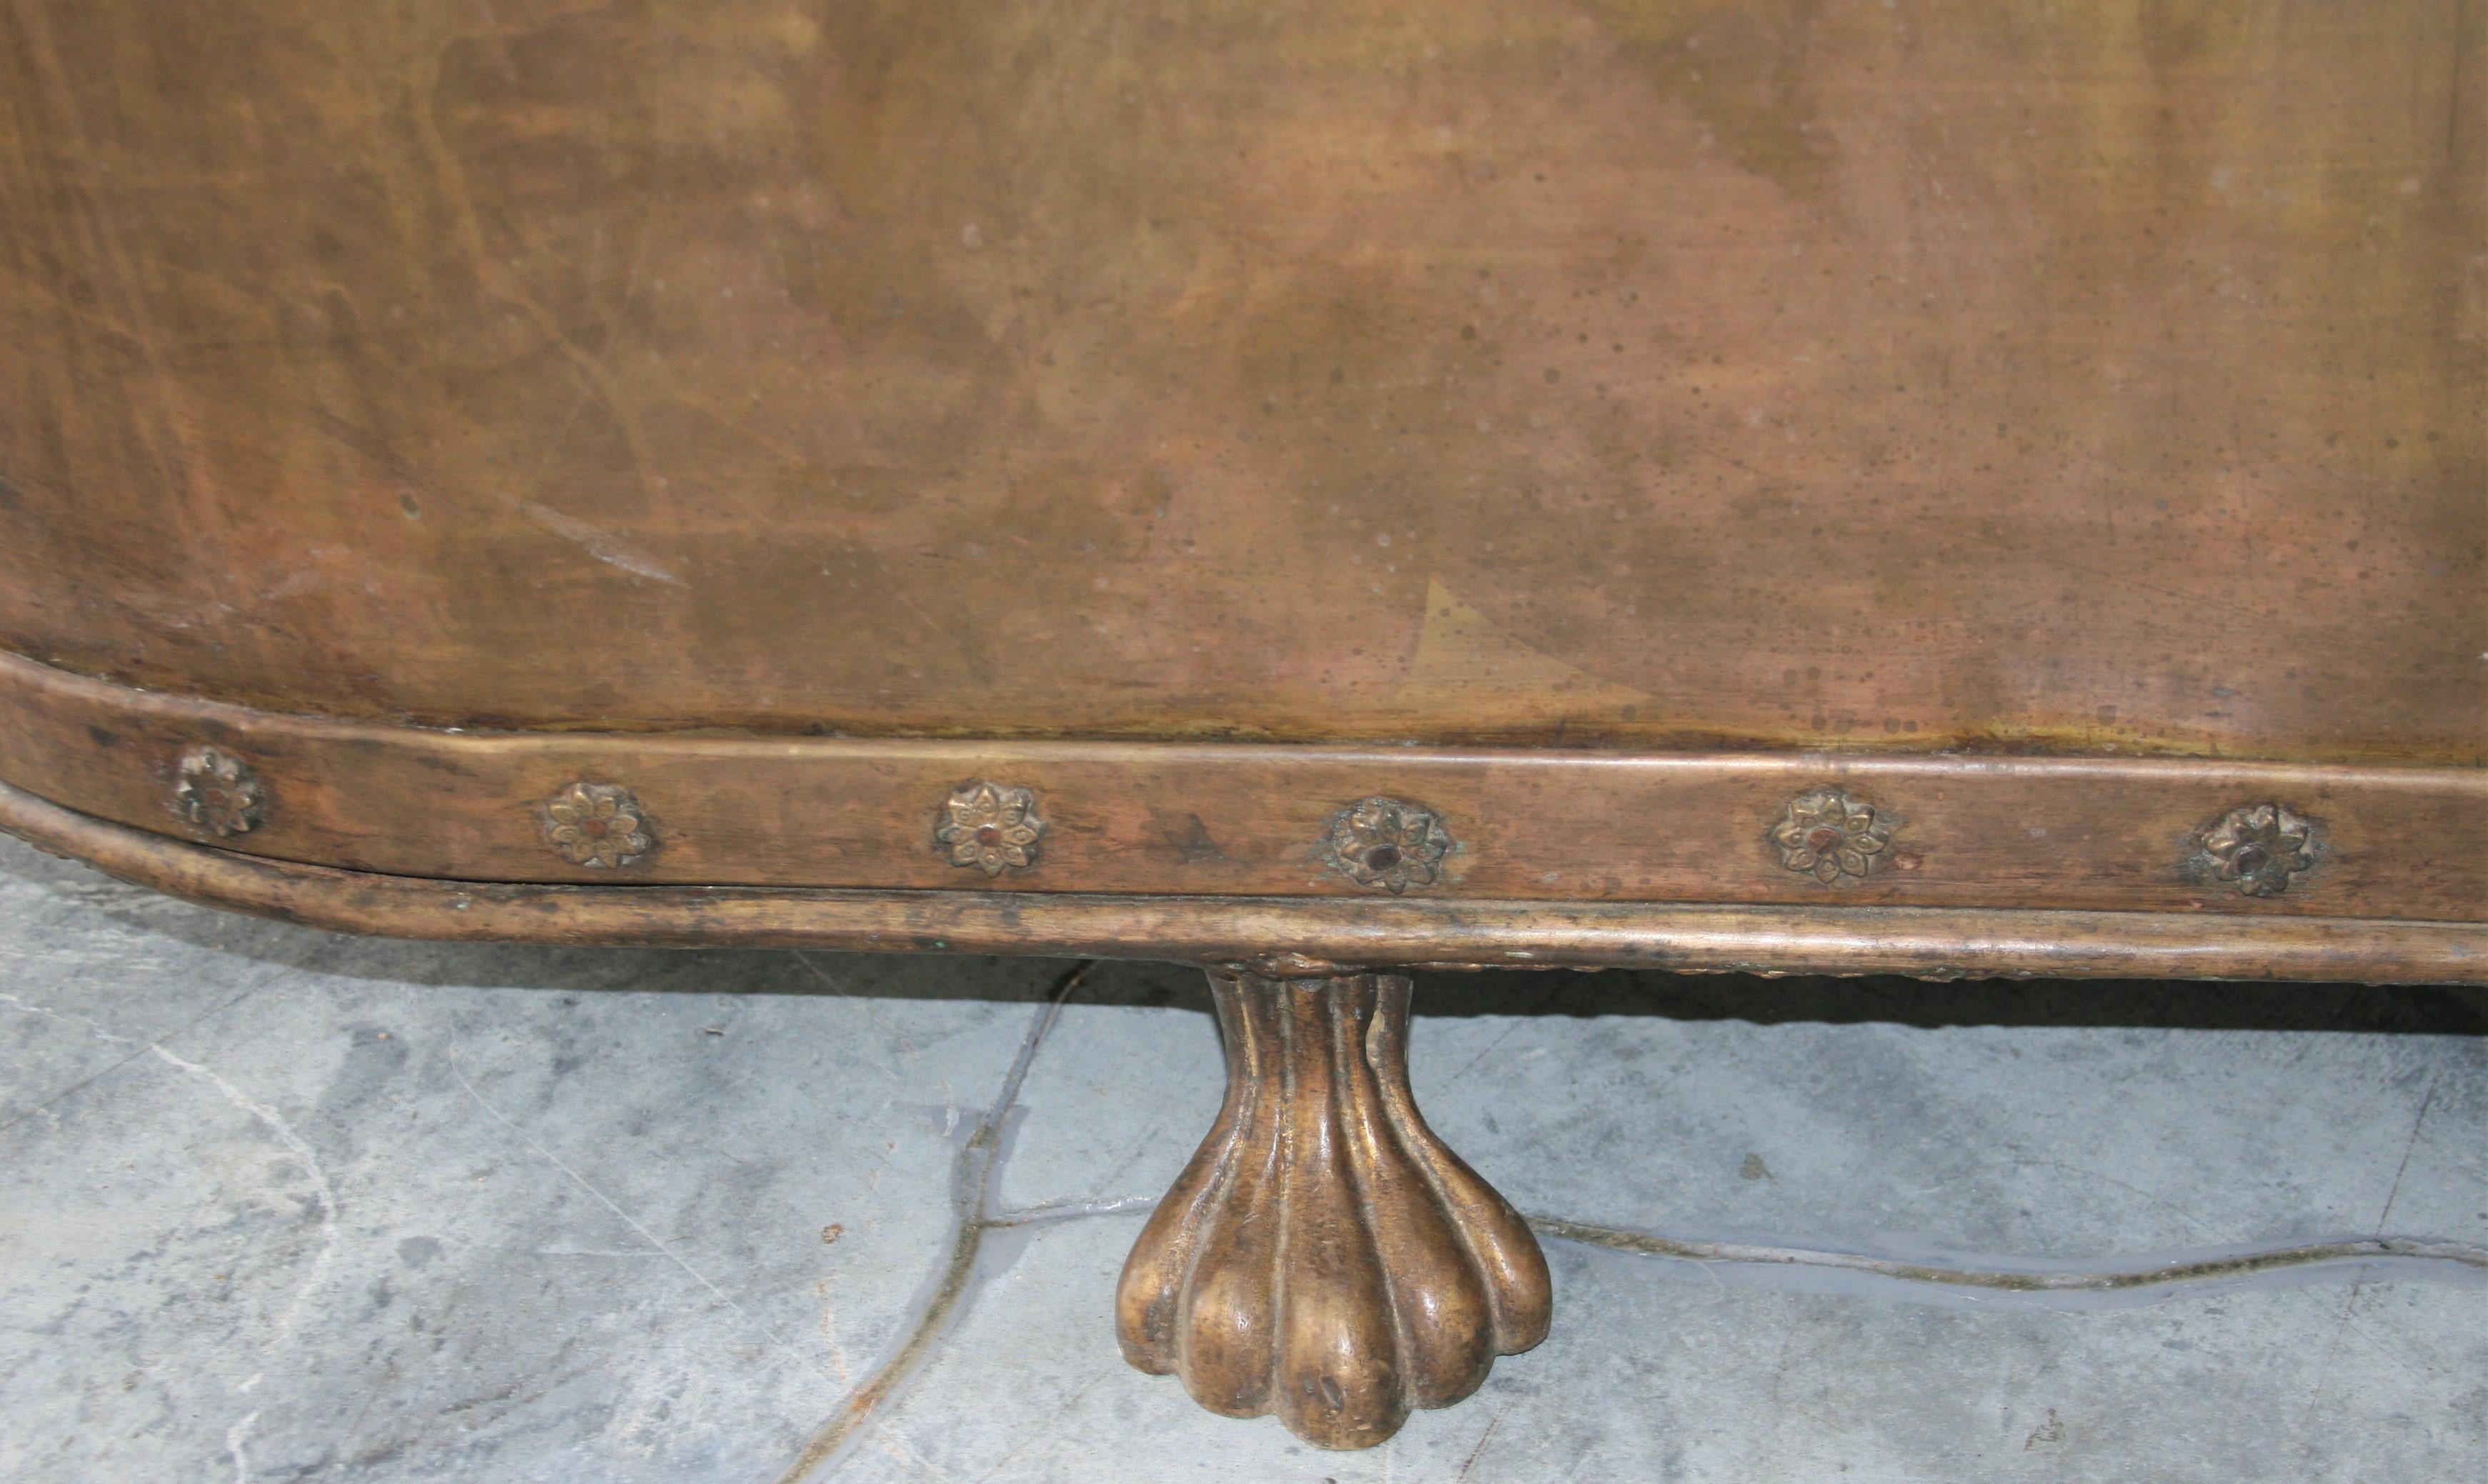 Indian Vintage Hand Hammered Copper Alloy Freestanding Bath Tub Featuring Claw Feet    